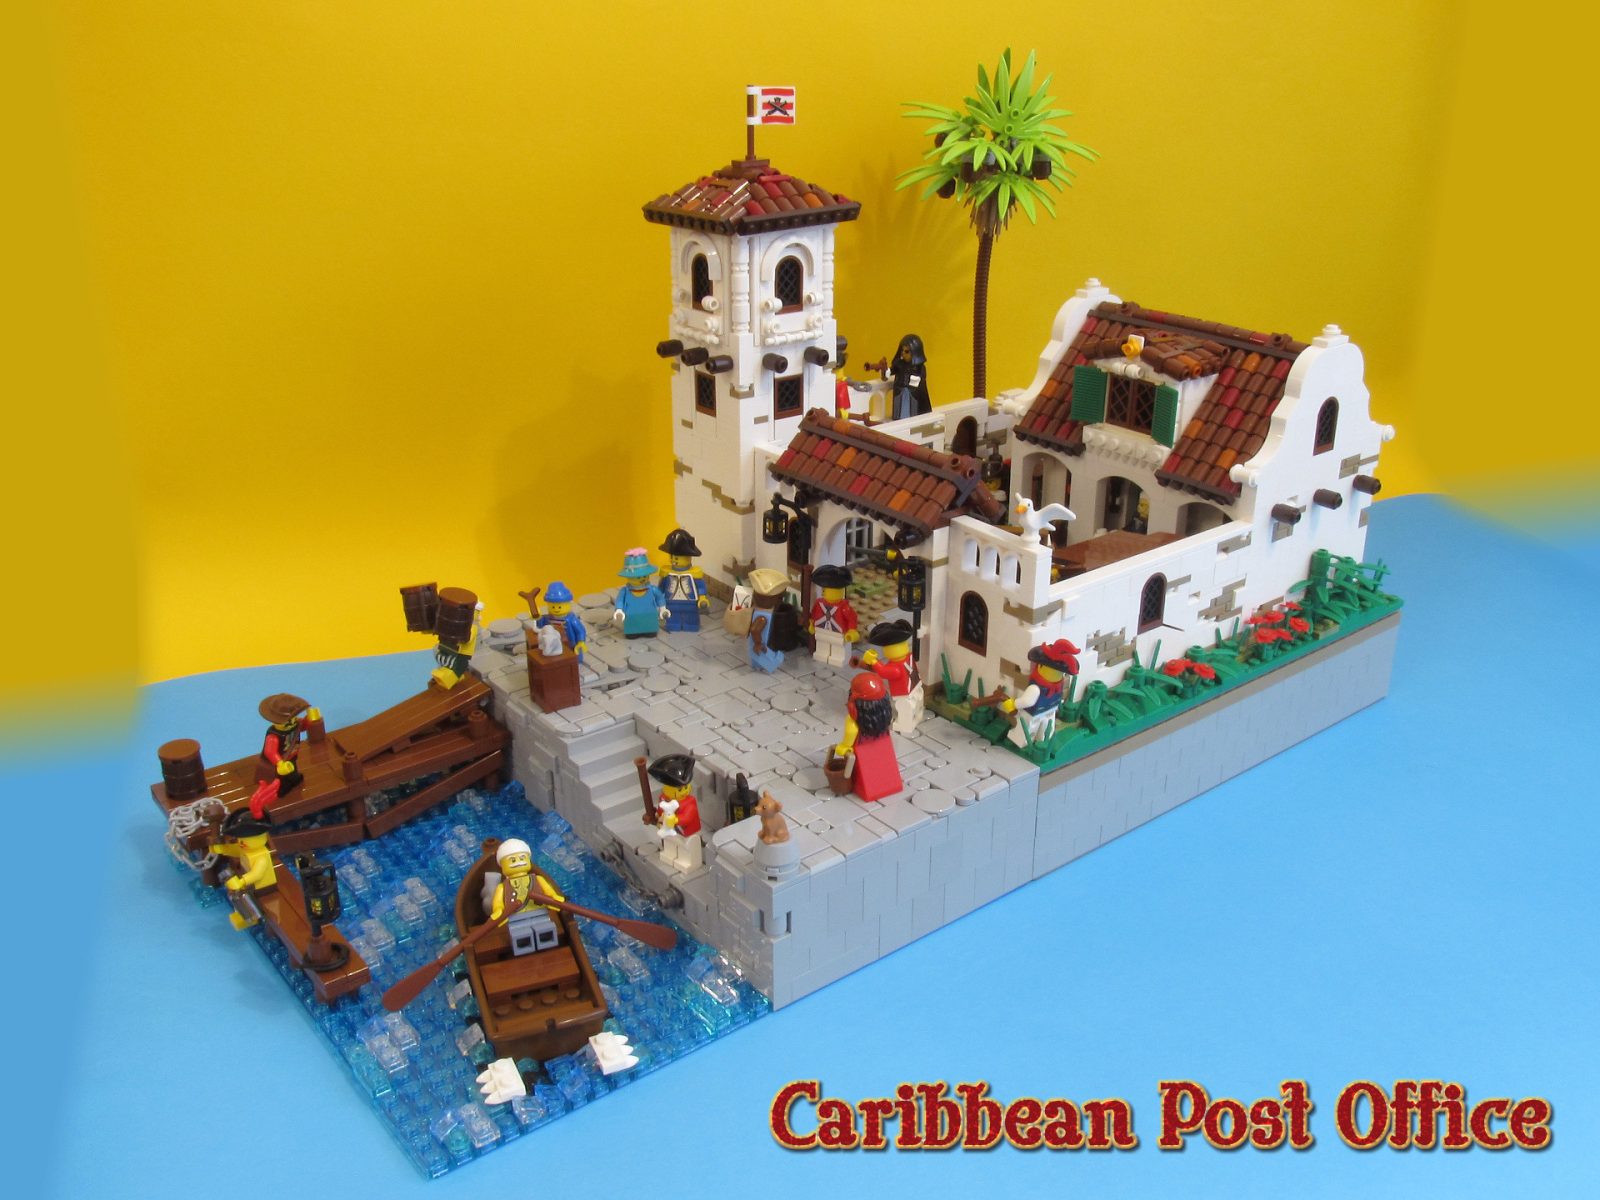 Photo of "Caribbean Post Office" by Piglet